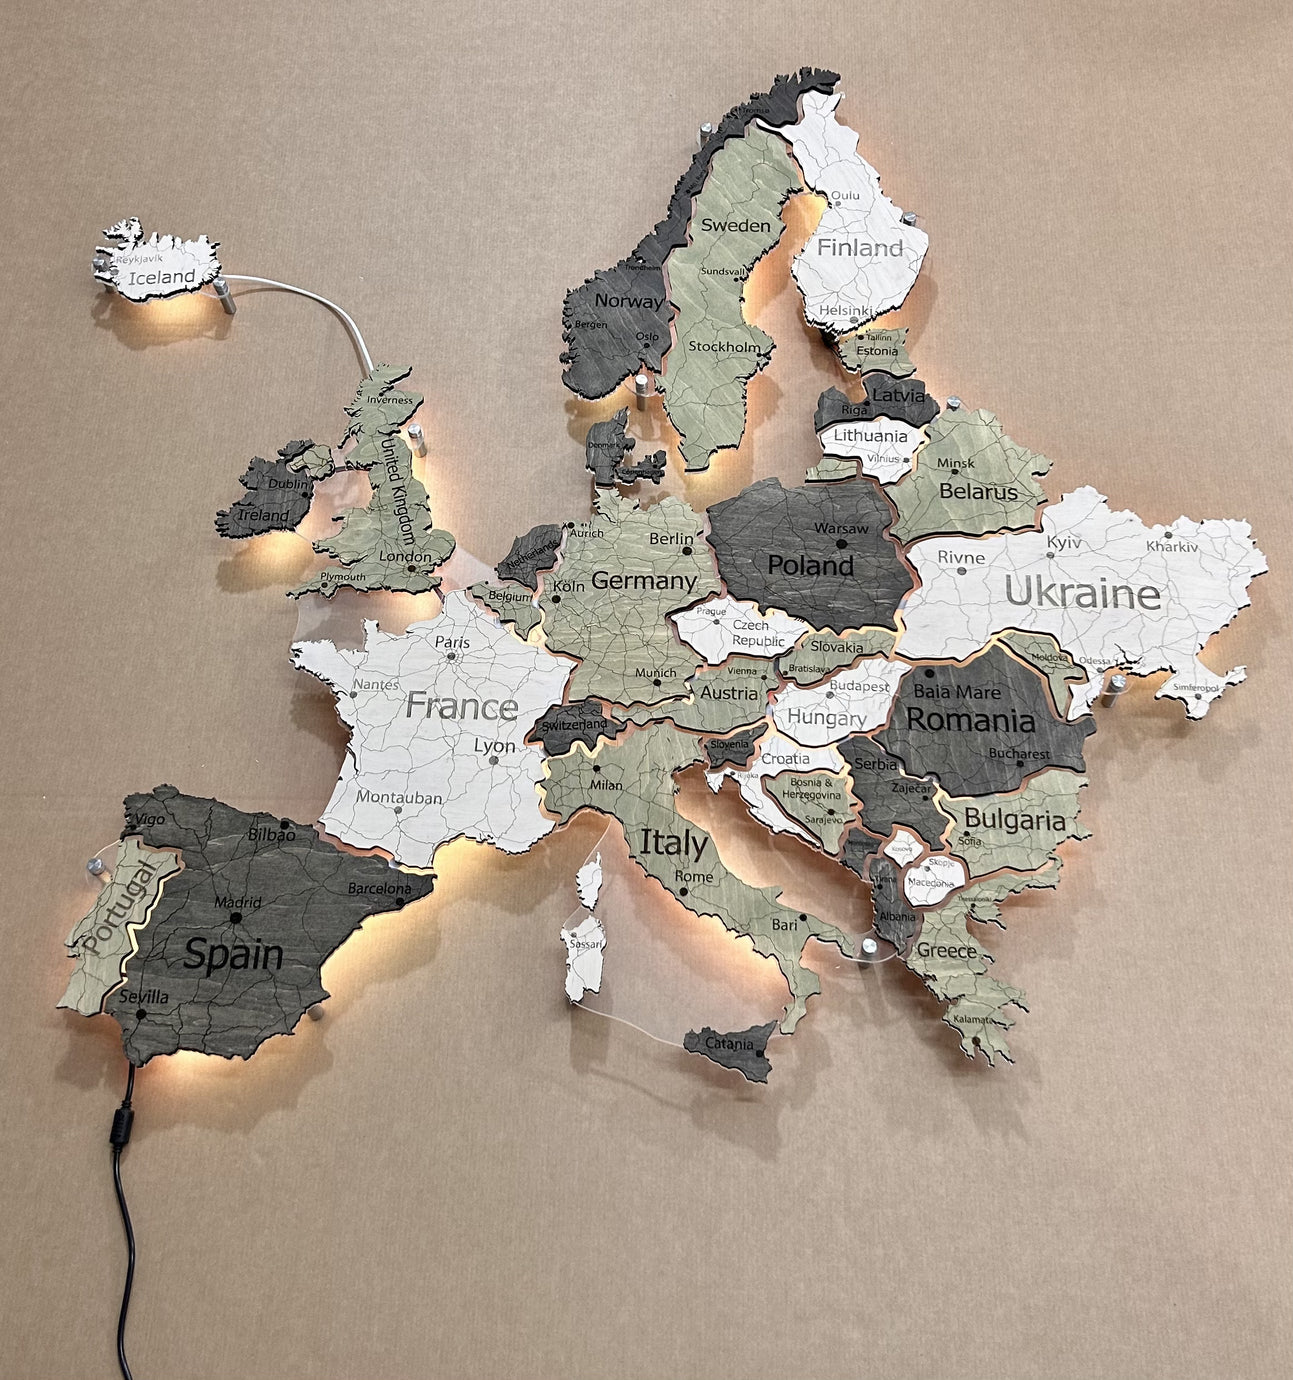 Europe LED map on acrylic glass with backlighting between countries color Verde